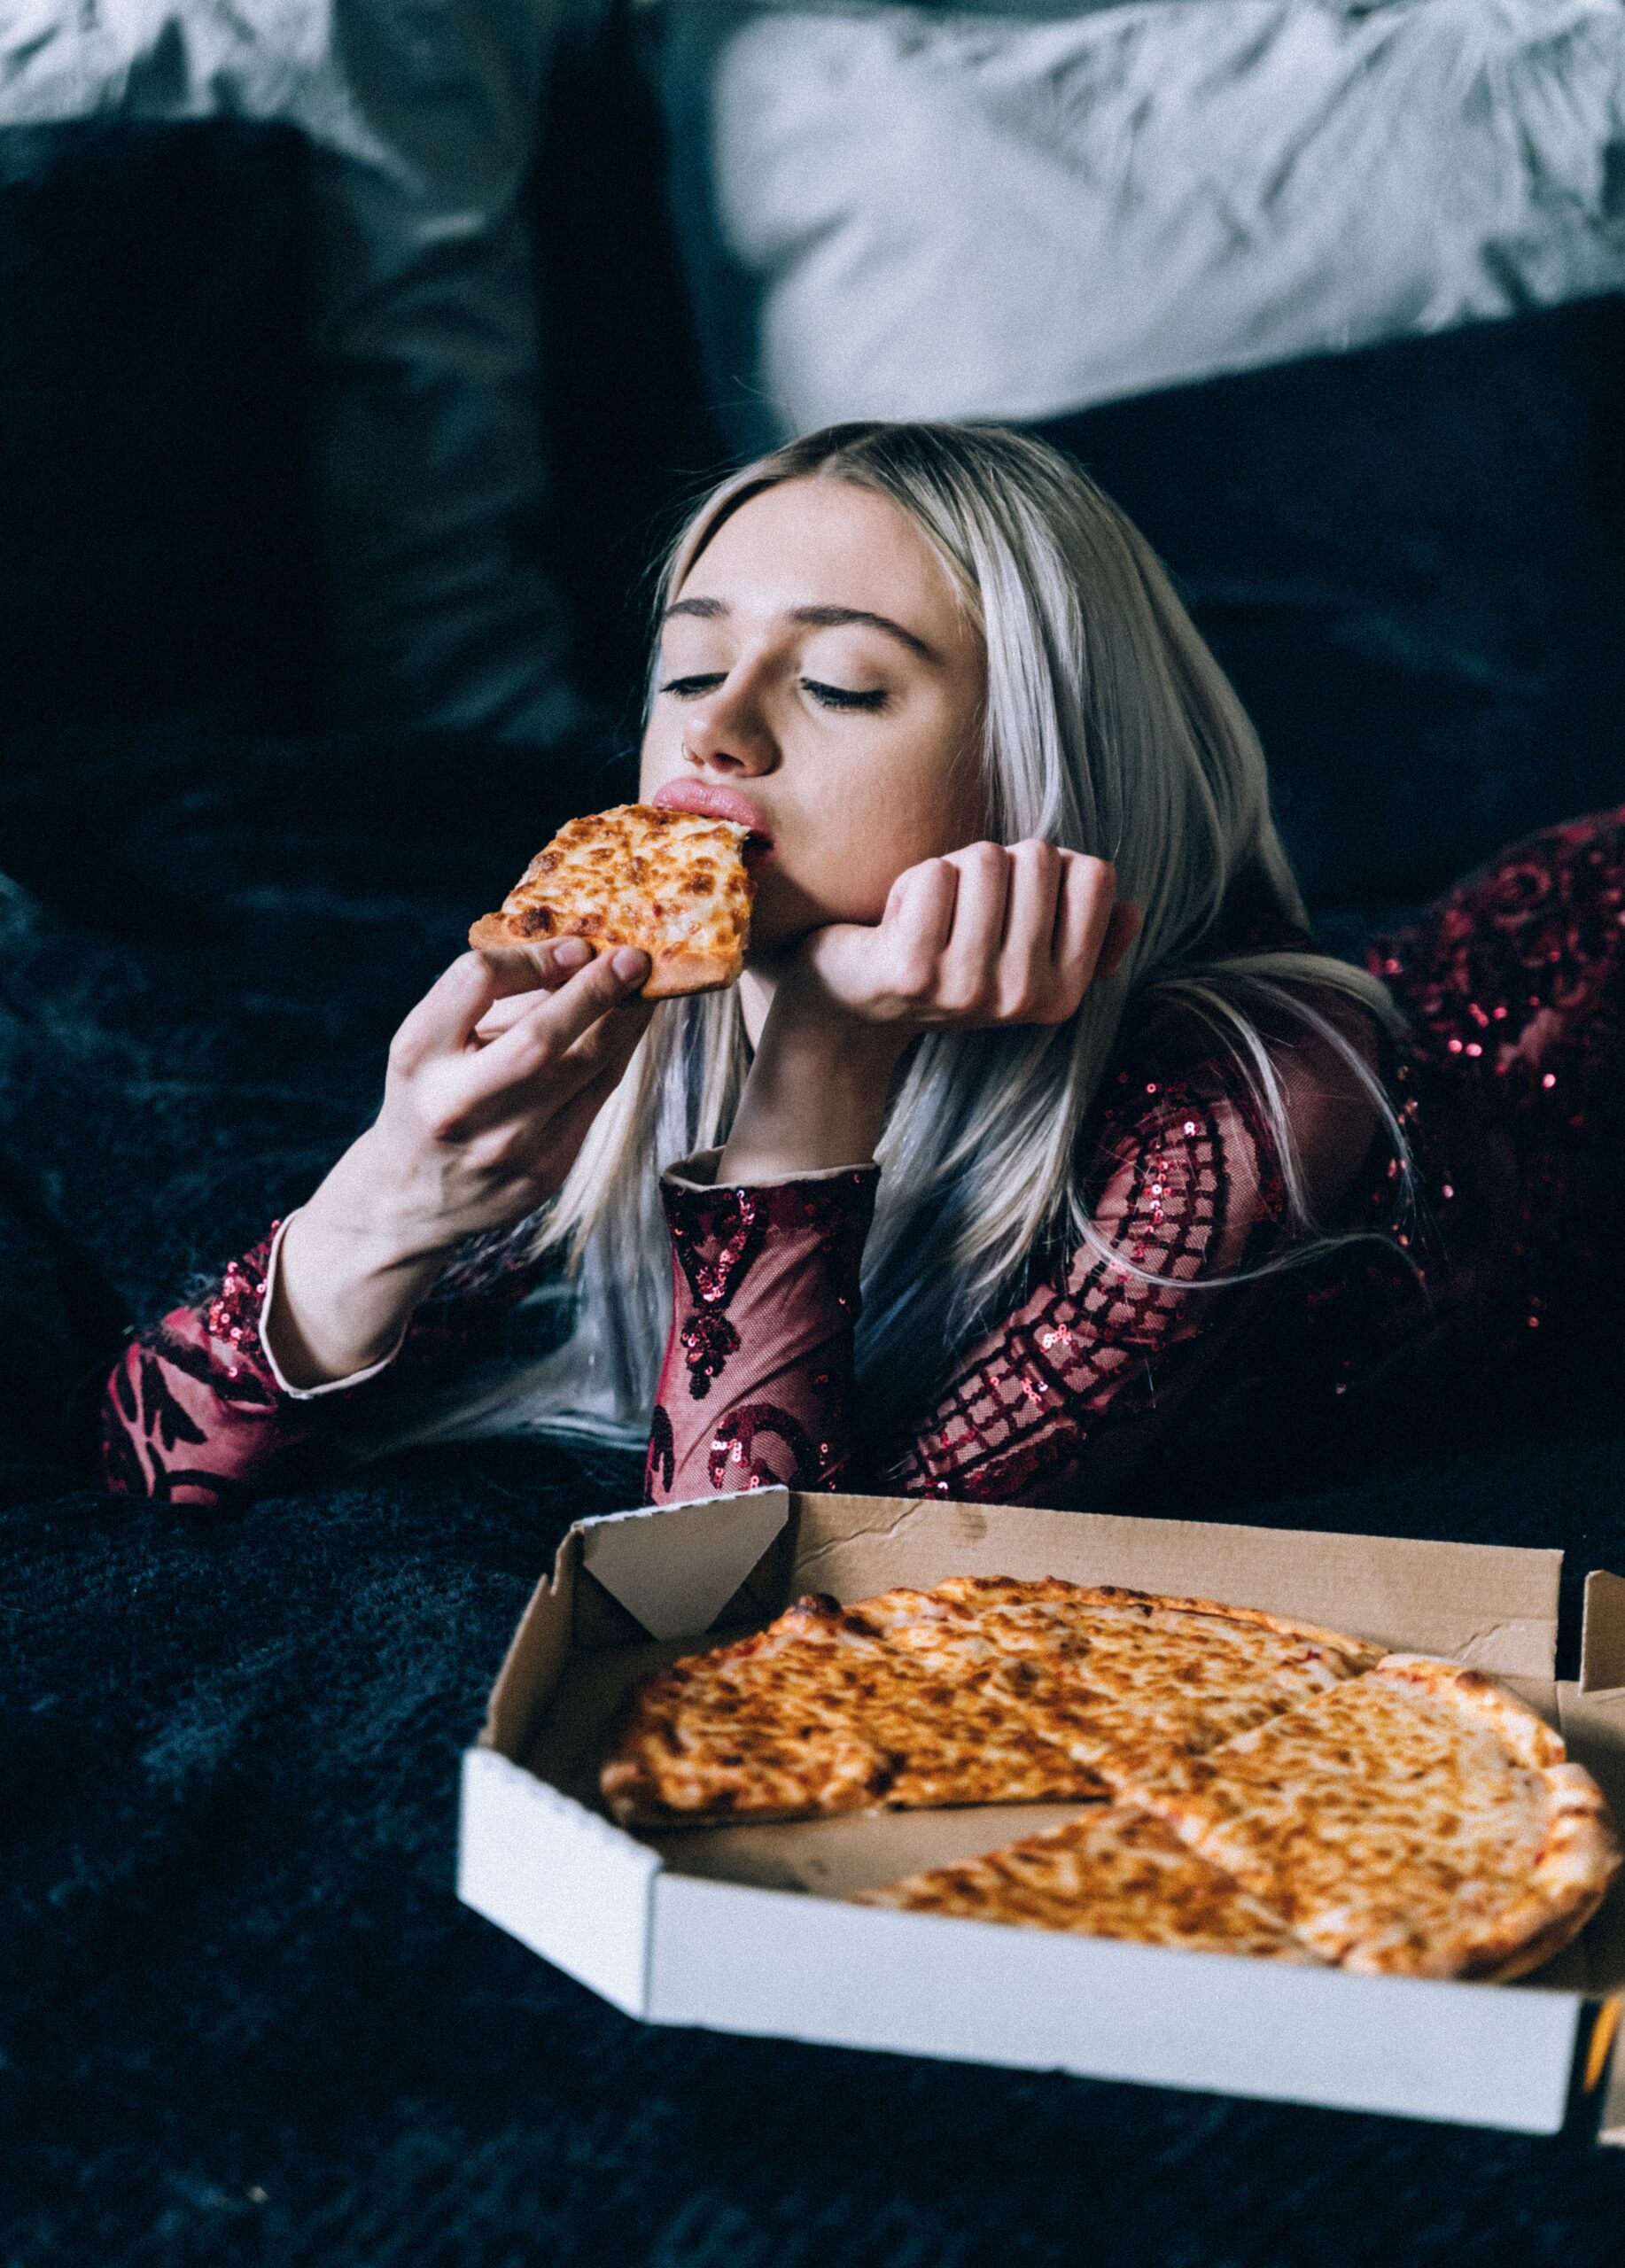 woman eating pizza out of the pizza box - 13 Signs You Have an Unhealthy Relationship With Food